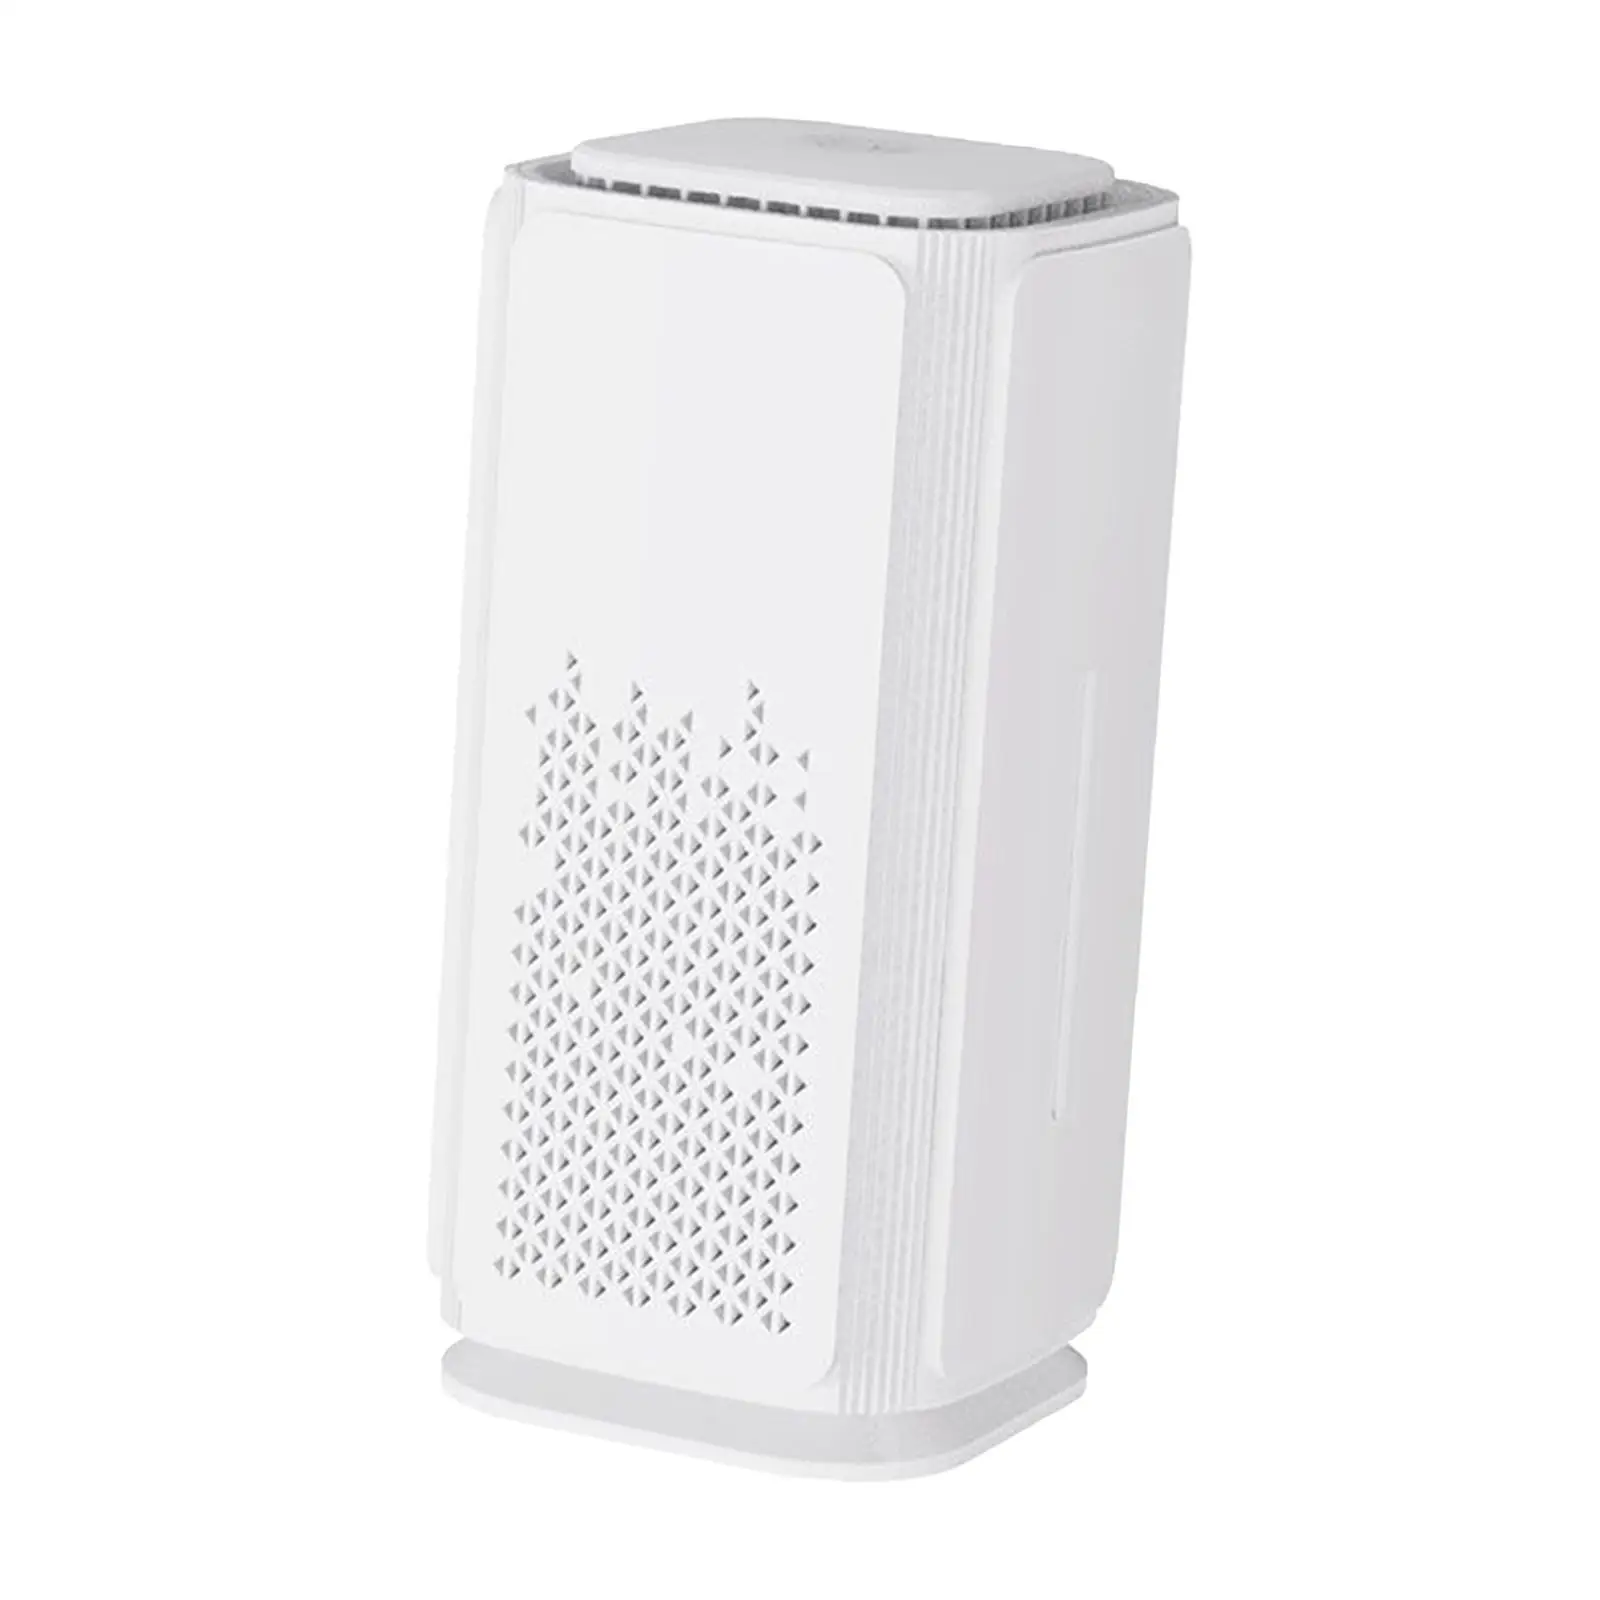 Portable Air Purifier Multi Scene Use Filtration System Odor Smoke Dust Silent Tabletop Air Freshener with Atmosphere Light Lamp